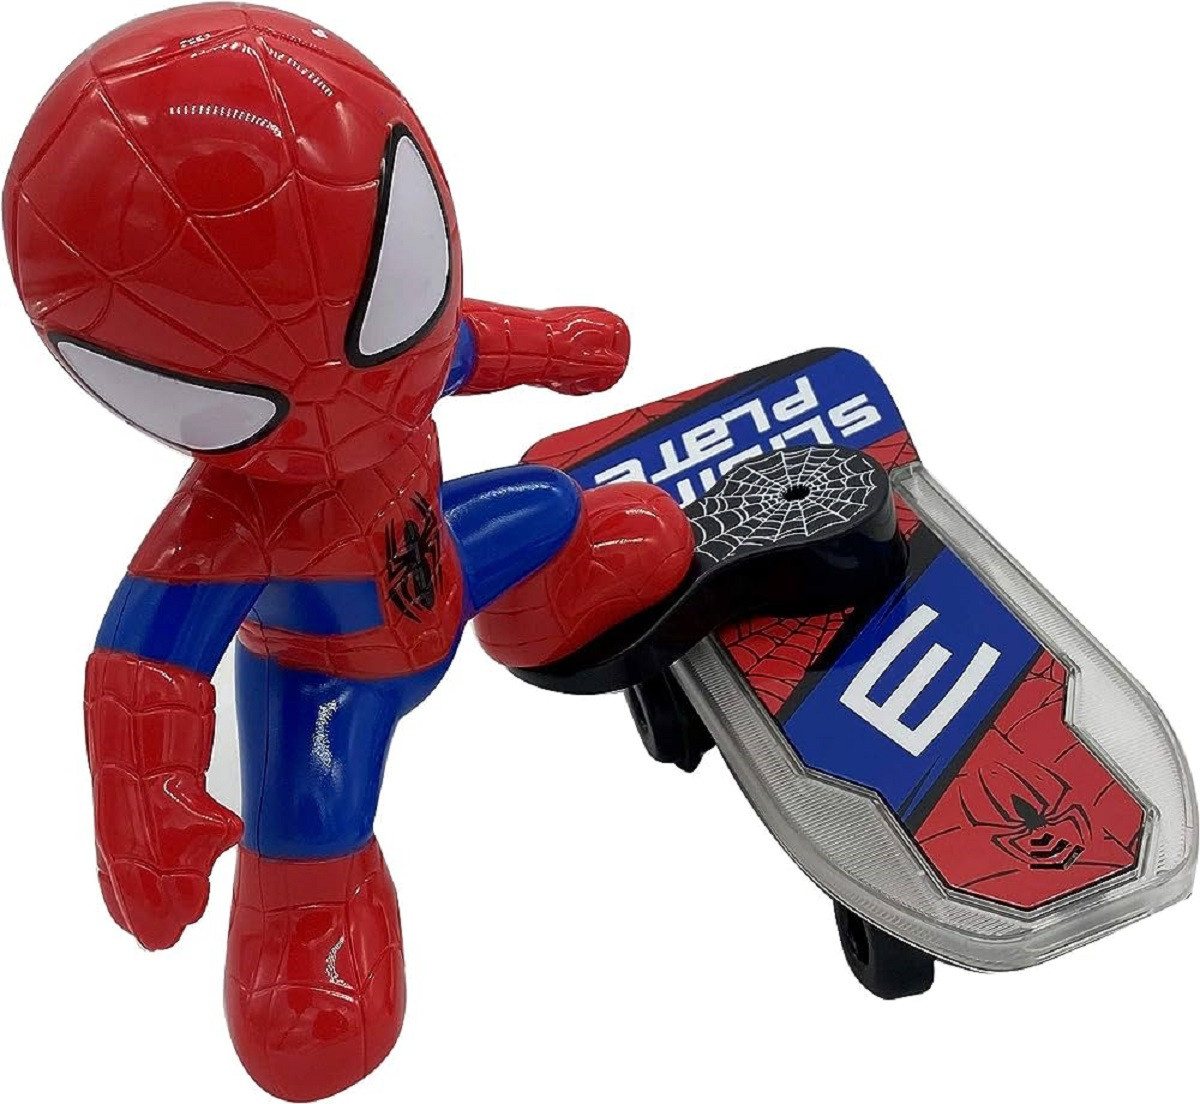 Spiderman Sliding plate 3 Product Code: 3553